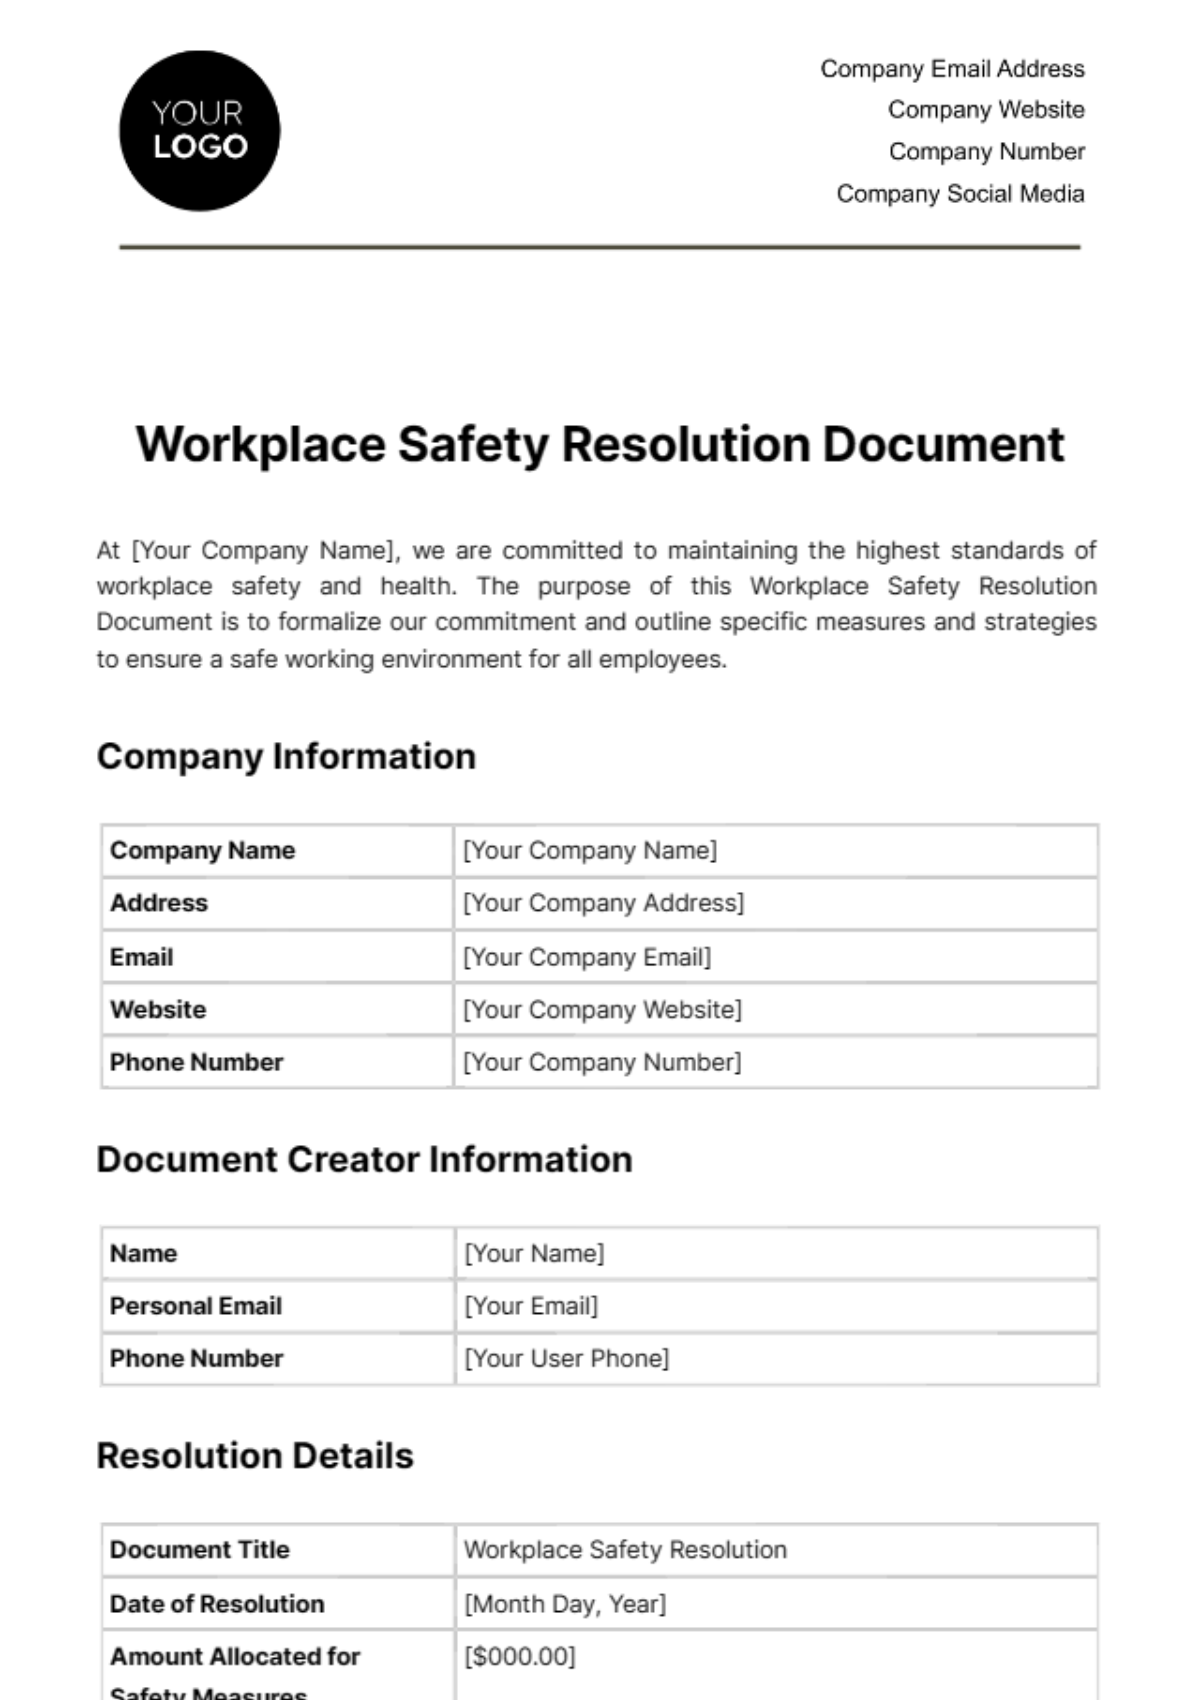 Free Workplace Safety Resolution Document Template